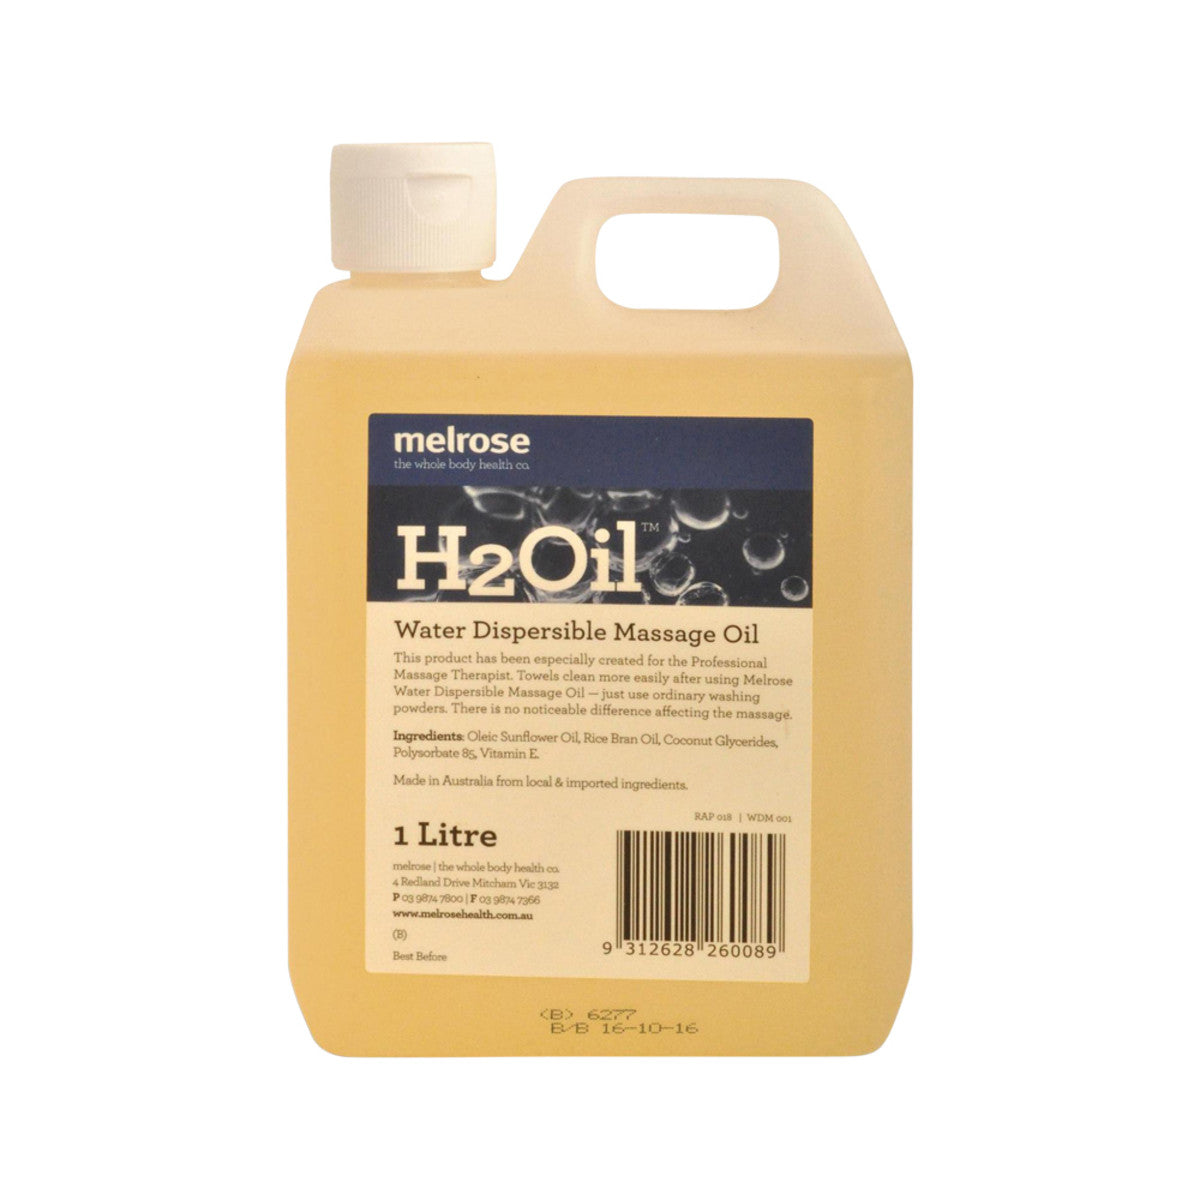 Melrose H2Oil Water Dispersible Massage Oil 1L-The Living Co.